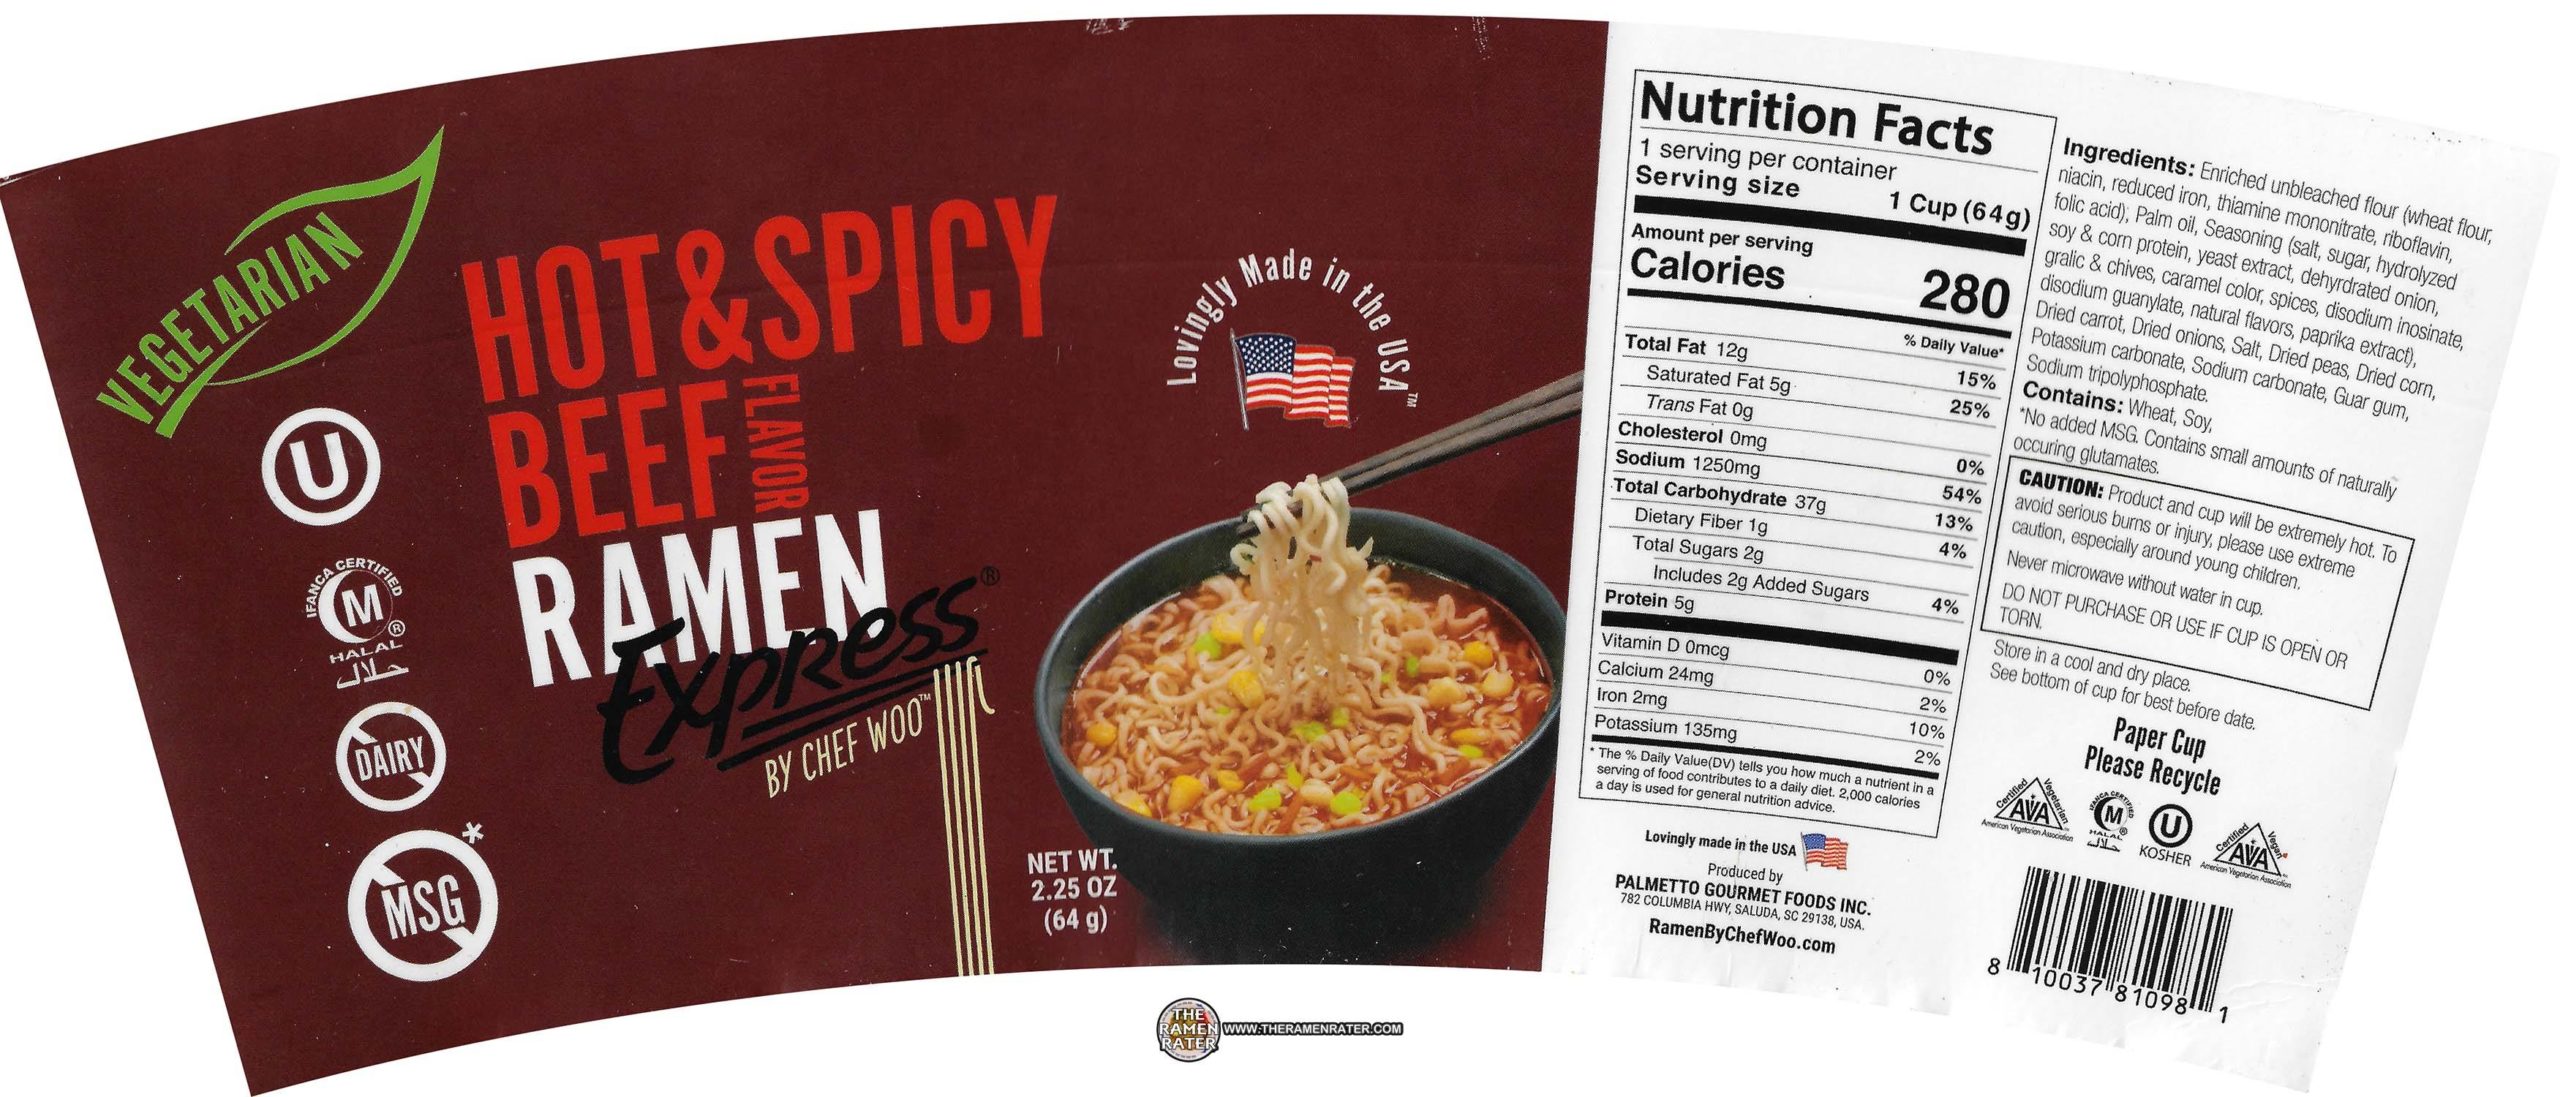 Ramen Express By Chef Woo Hot & Spicy Beef Flavor - United States.